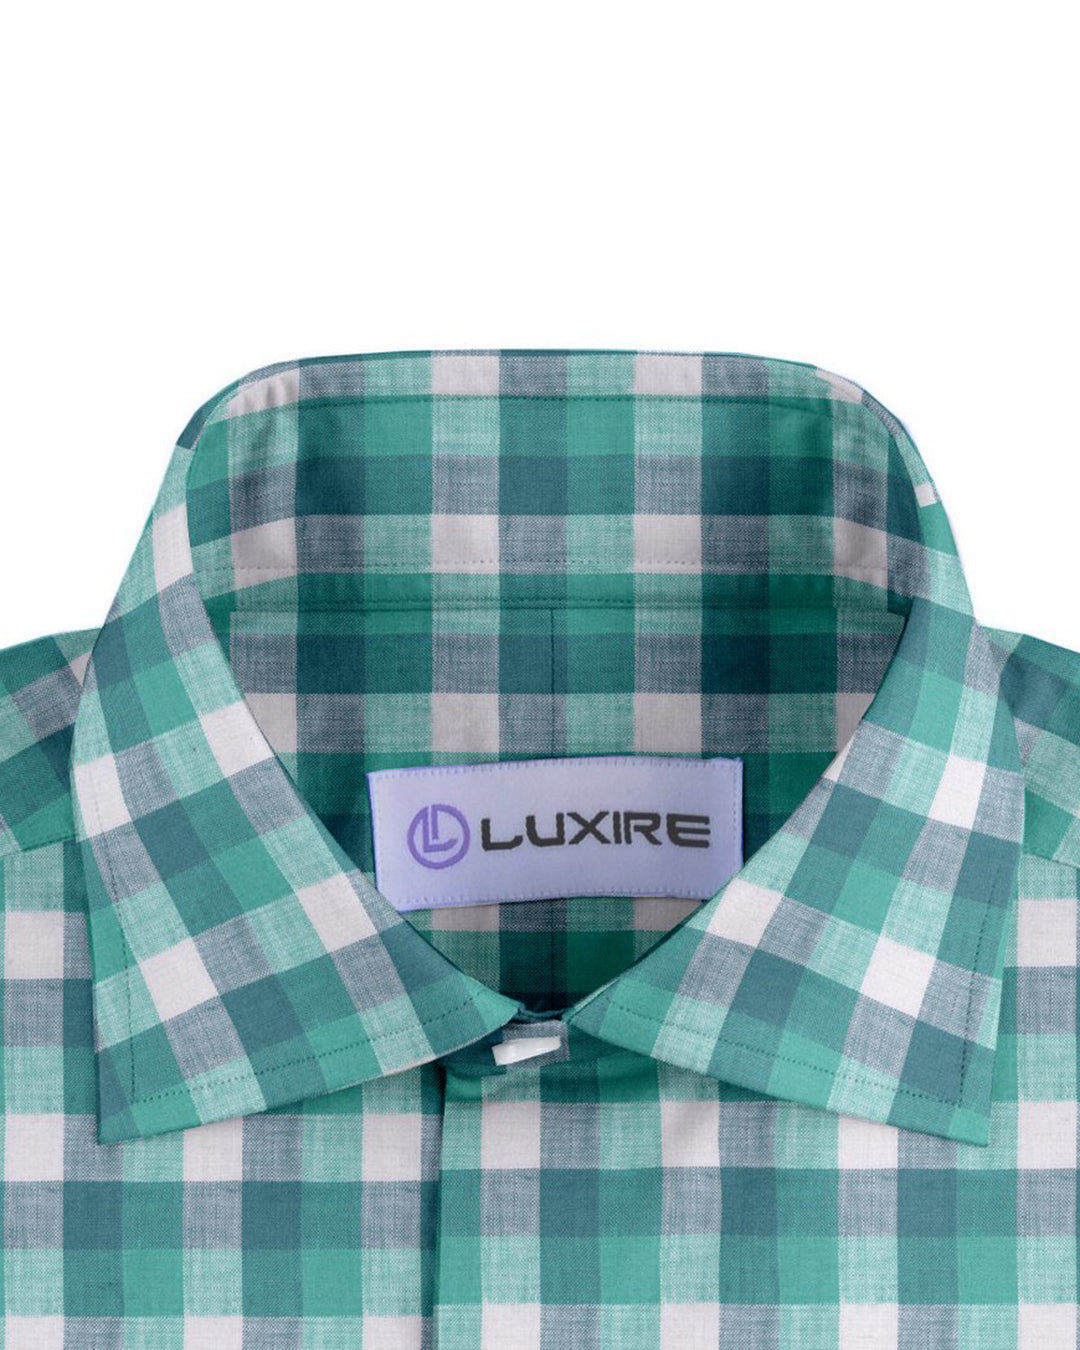 Collar of the custom linen shirt for men in shades of green by Luxire Clothing